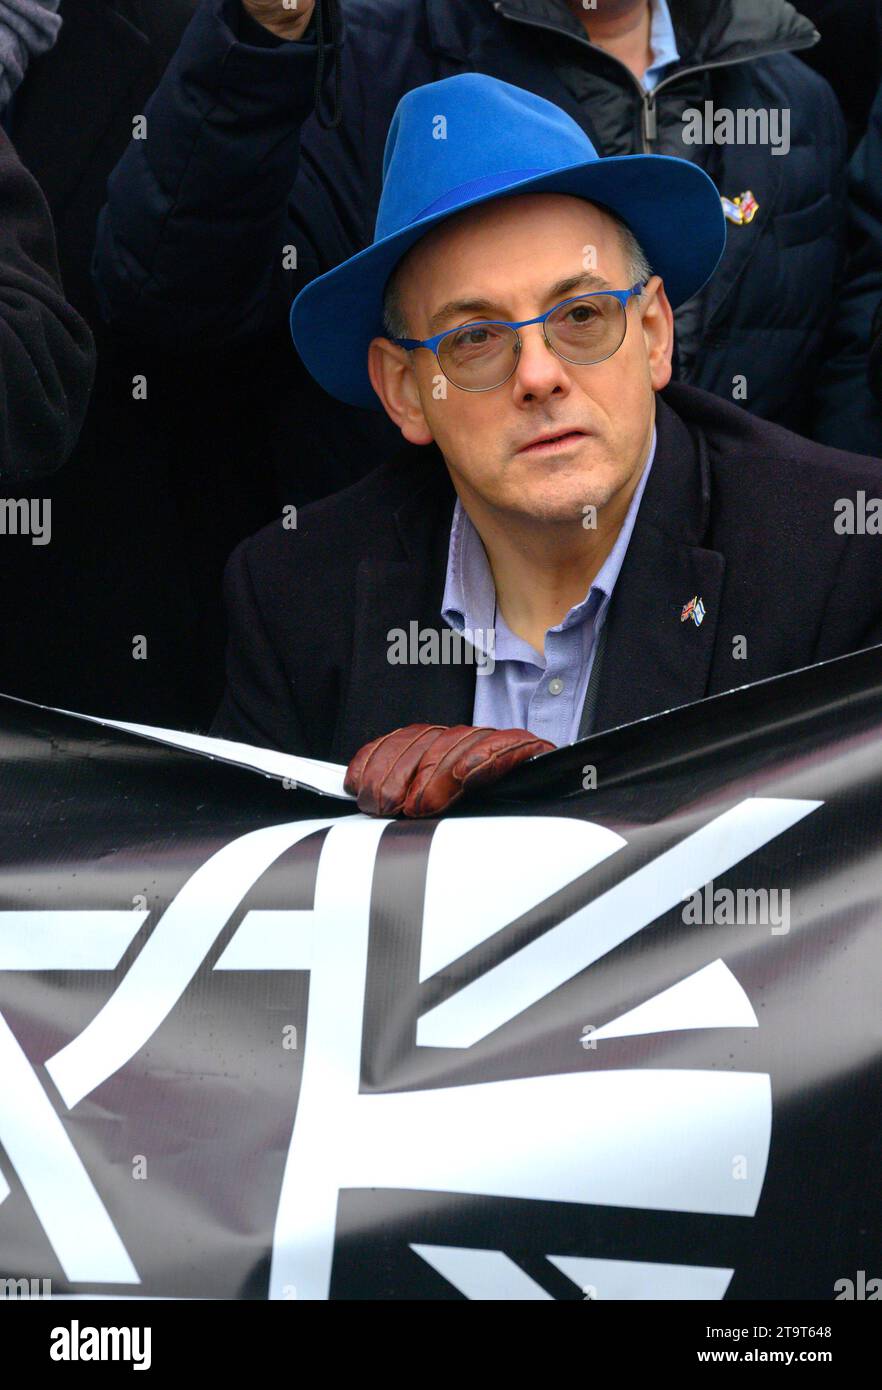 Robert Halfon MP (Con: Harlow) vice president of the Jewish Leadership Council, taking part in the March Against Antisemitism, London, 26th November 2 Stock Photo